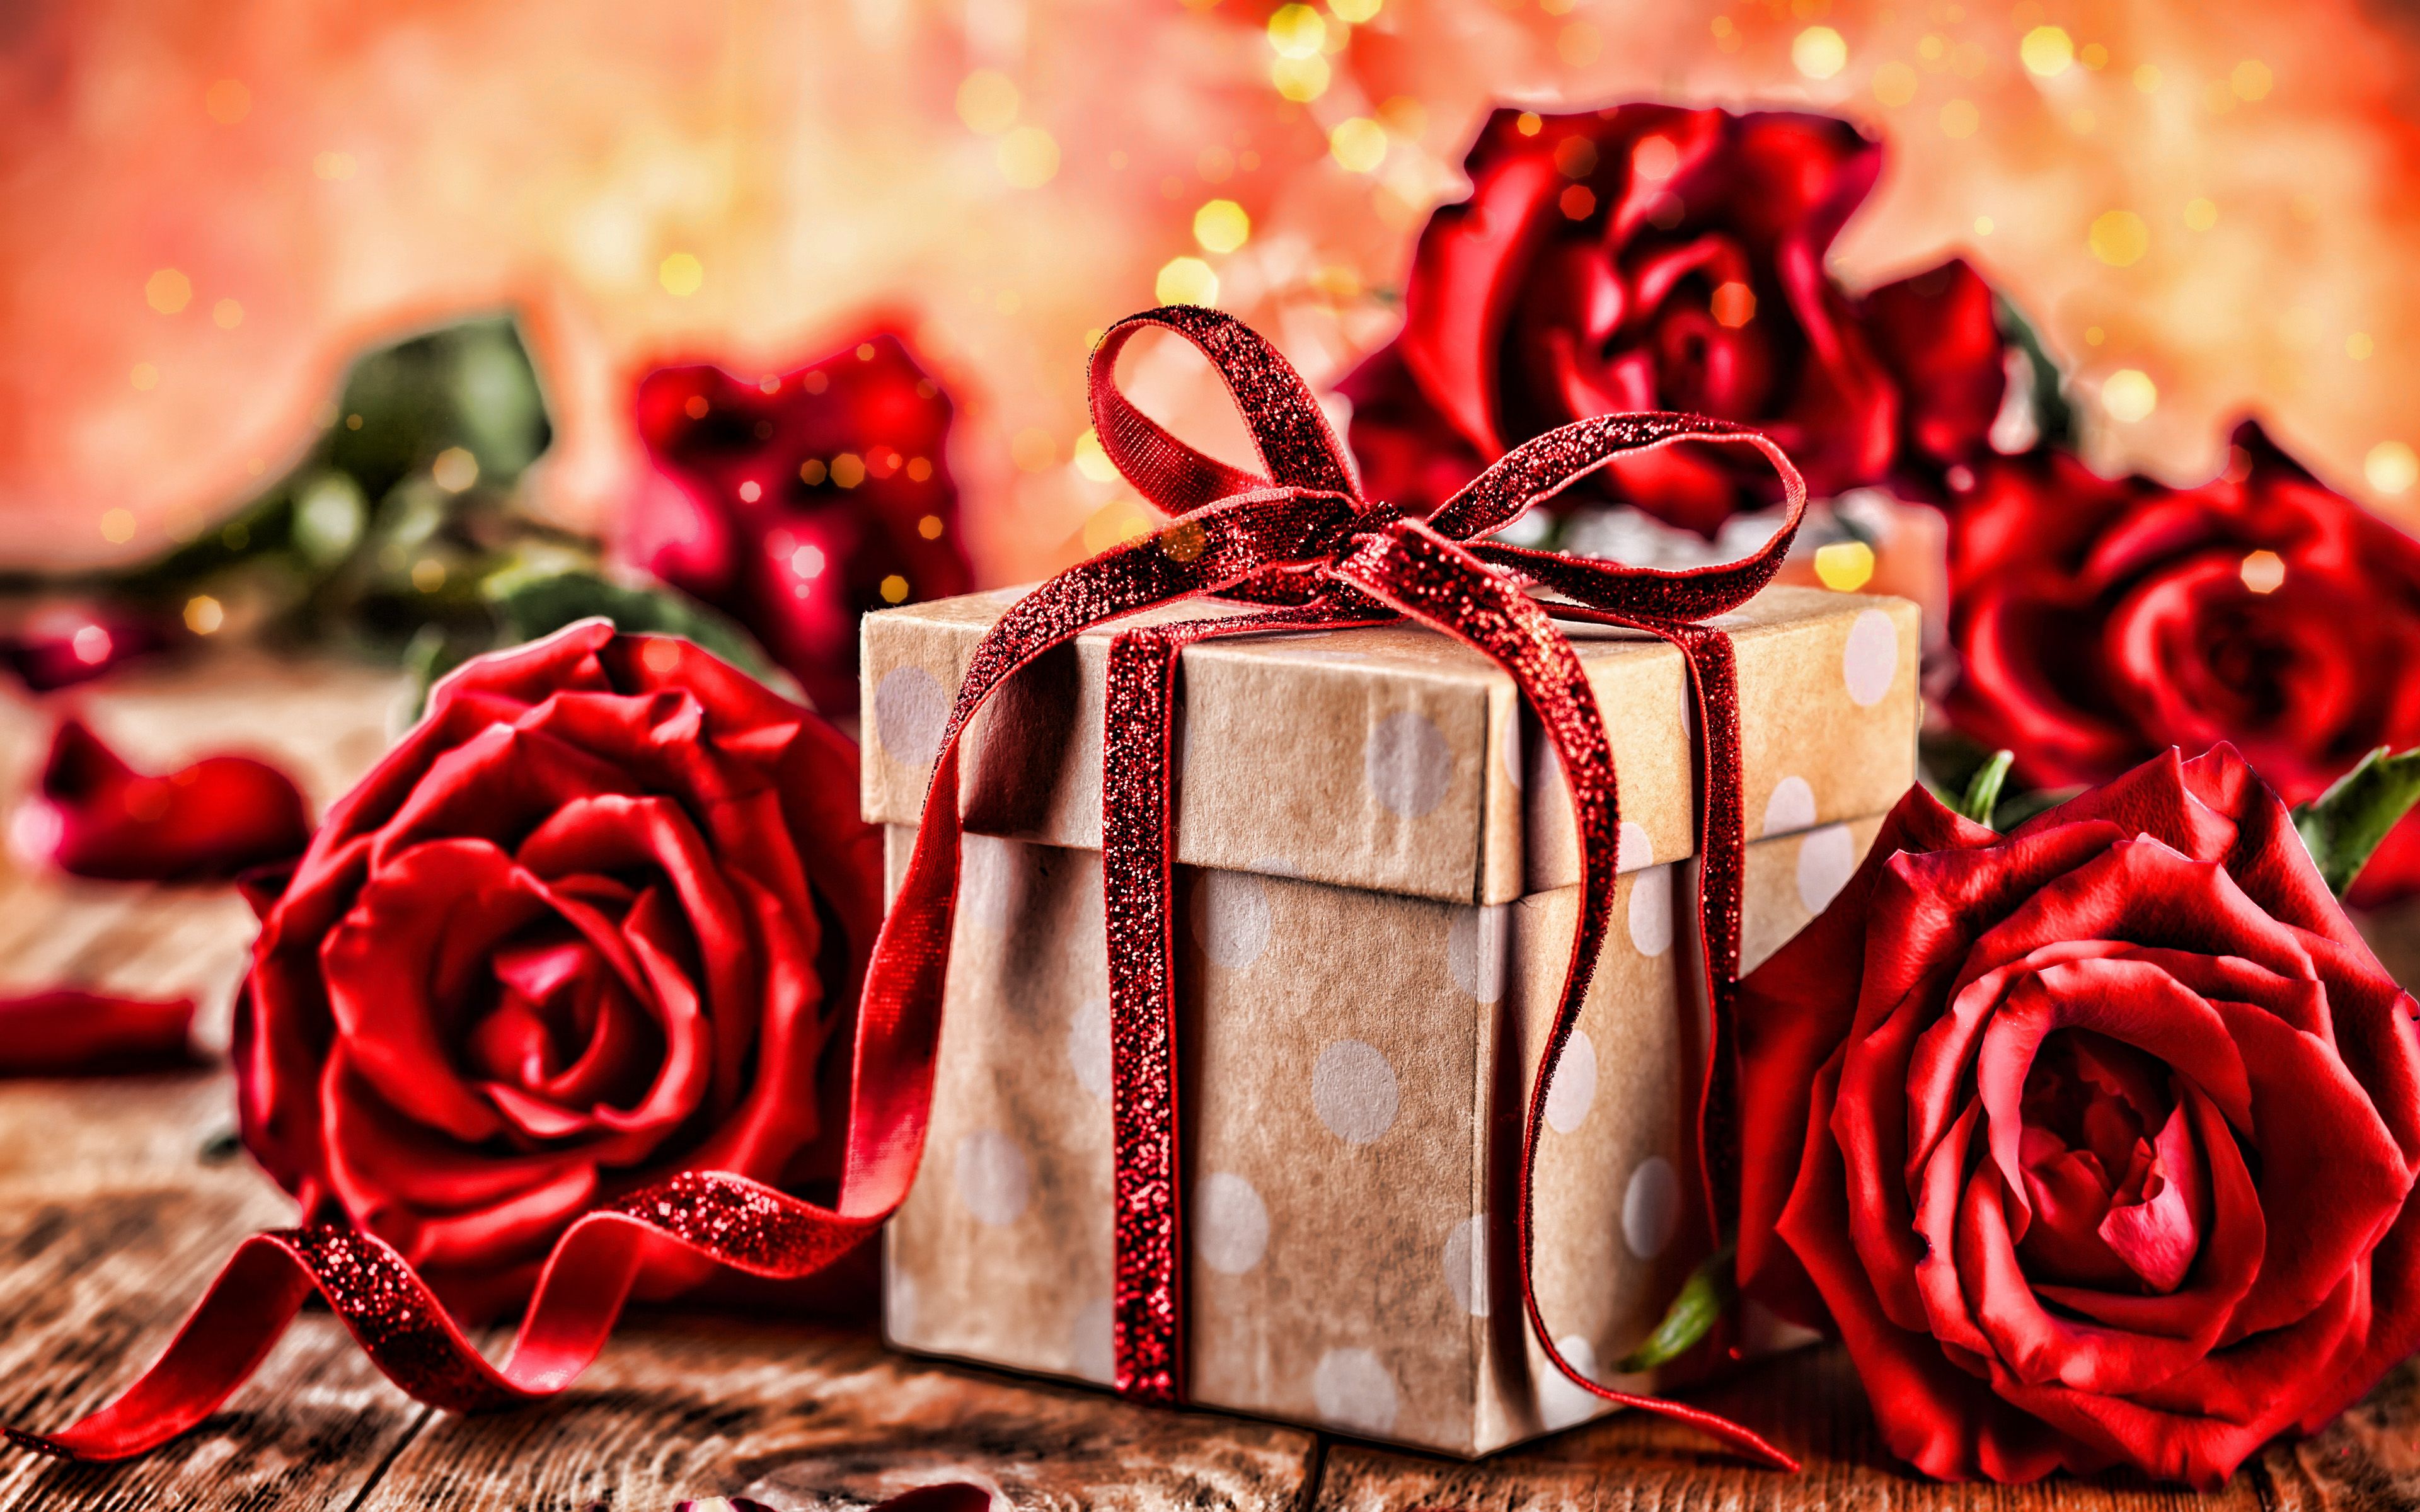 Download wallpaper Valentines Day, 4k, February gift box, red roses, macro, love concept, Valentines Day gift, Saint Valentines Day for desktop with resolution 3840x2400. High Quality HD picture wallpaper